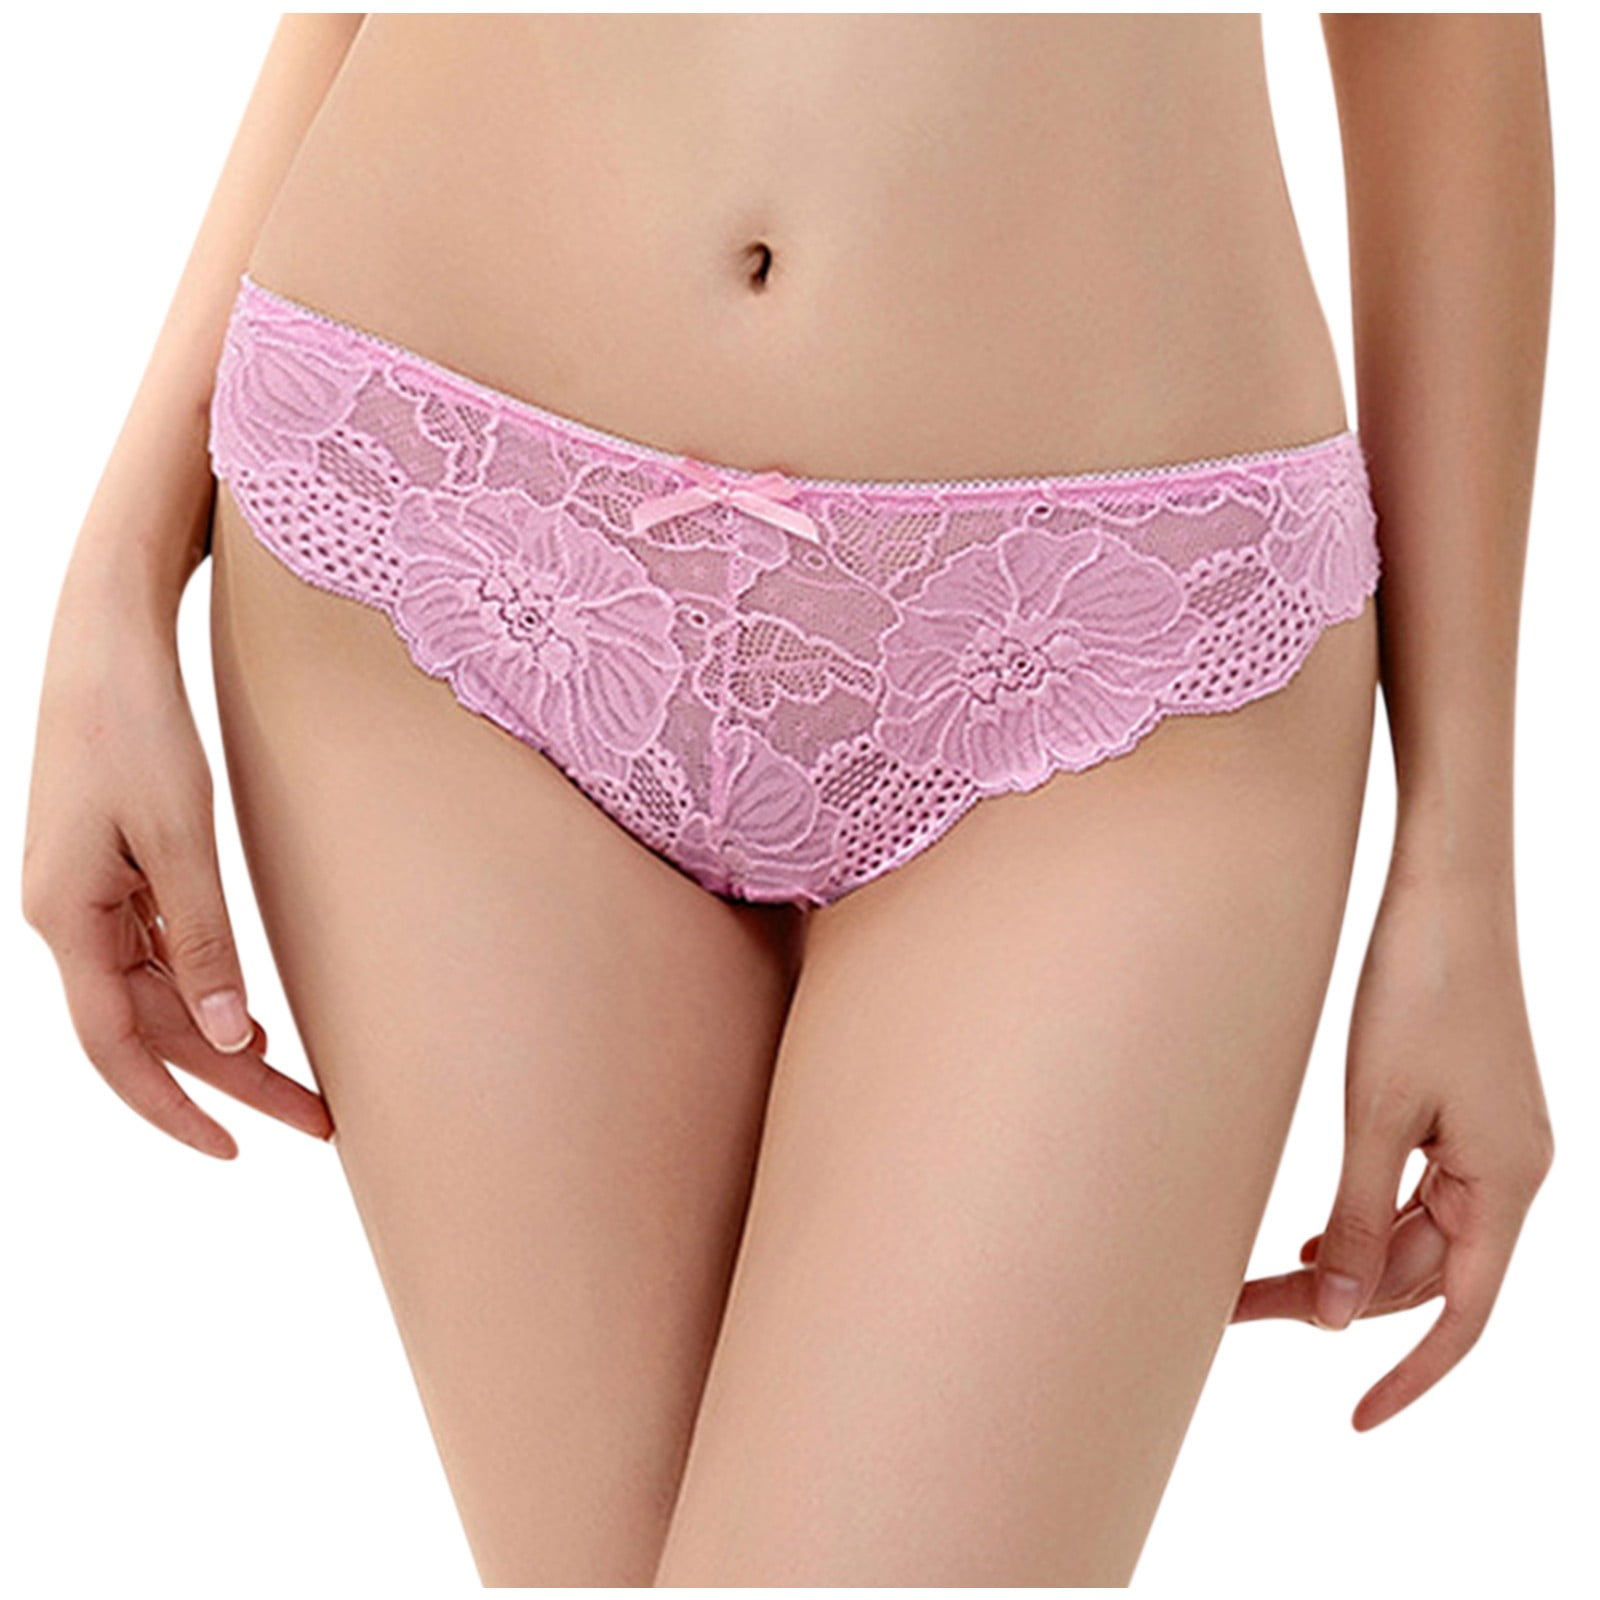 Kayannuo Cotton Underwear For Women Christmas Clearance Sexy Ladies  Transparent Lace Panties Big Size Cotton Hollow Breathable Quality Hot Pink  